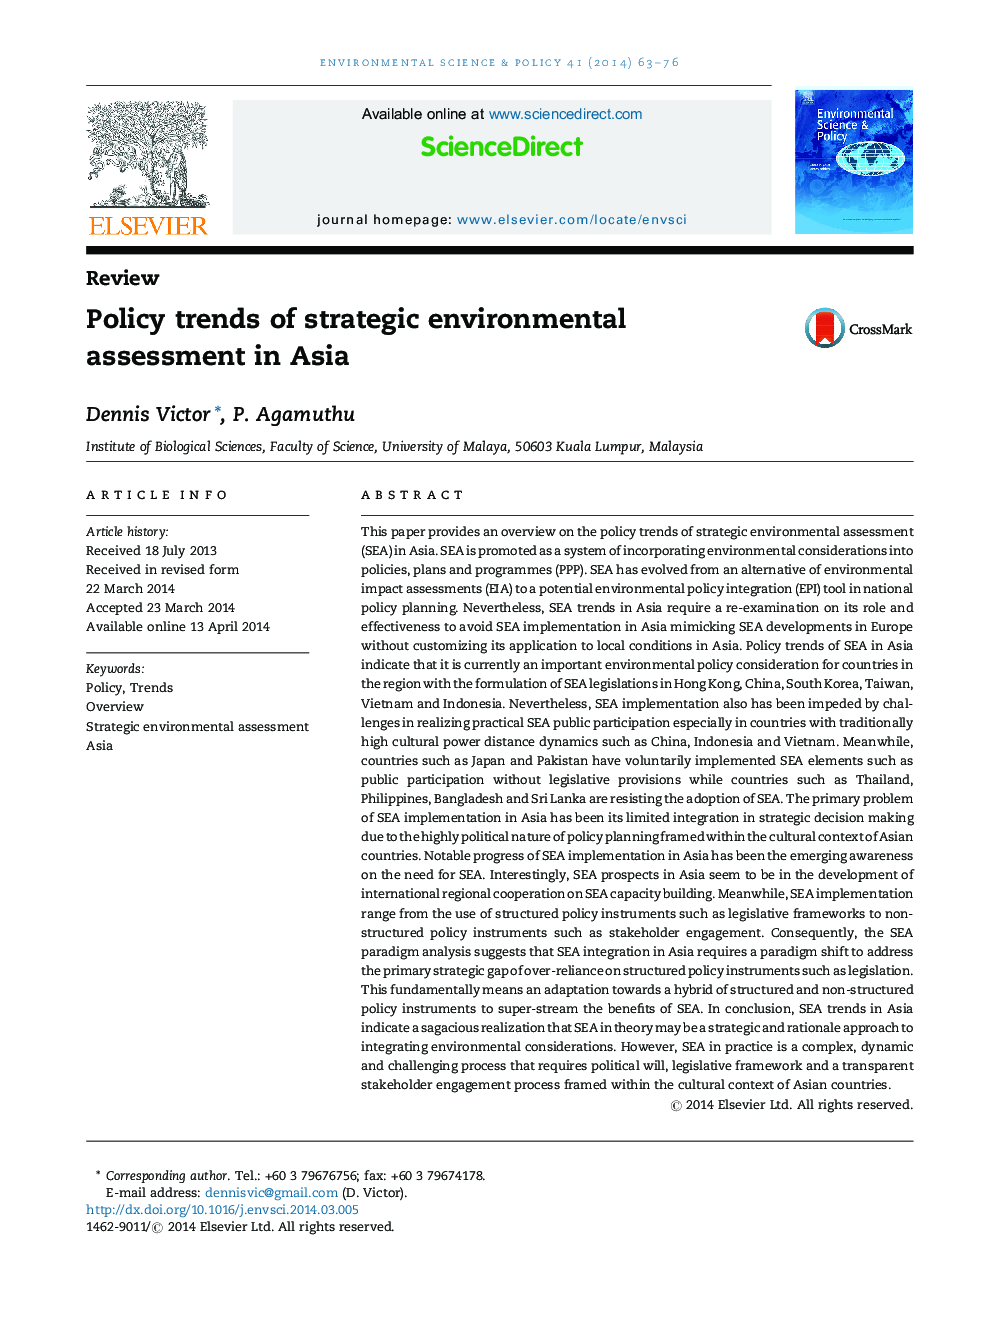 Policy trends of strategic environmental assessment in Asia